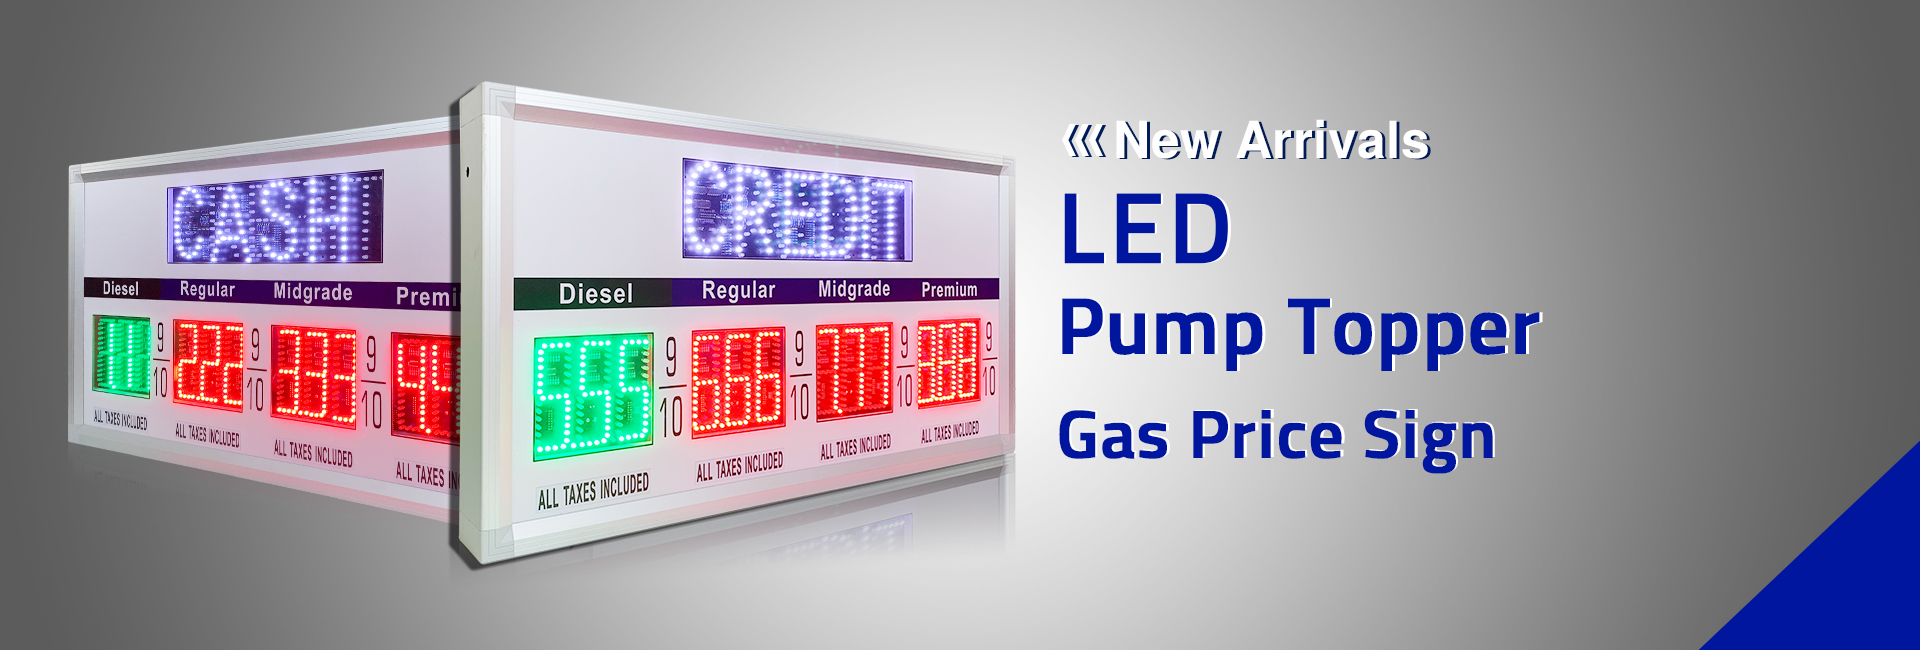 led pump topper price sign